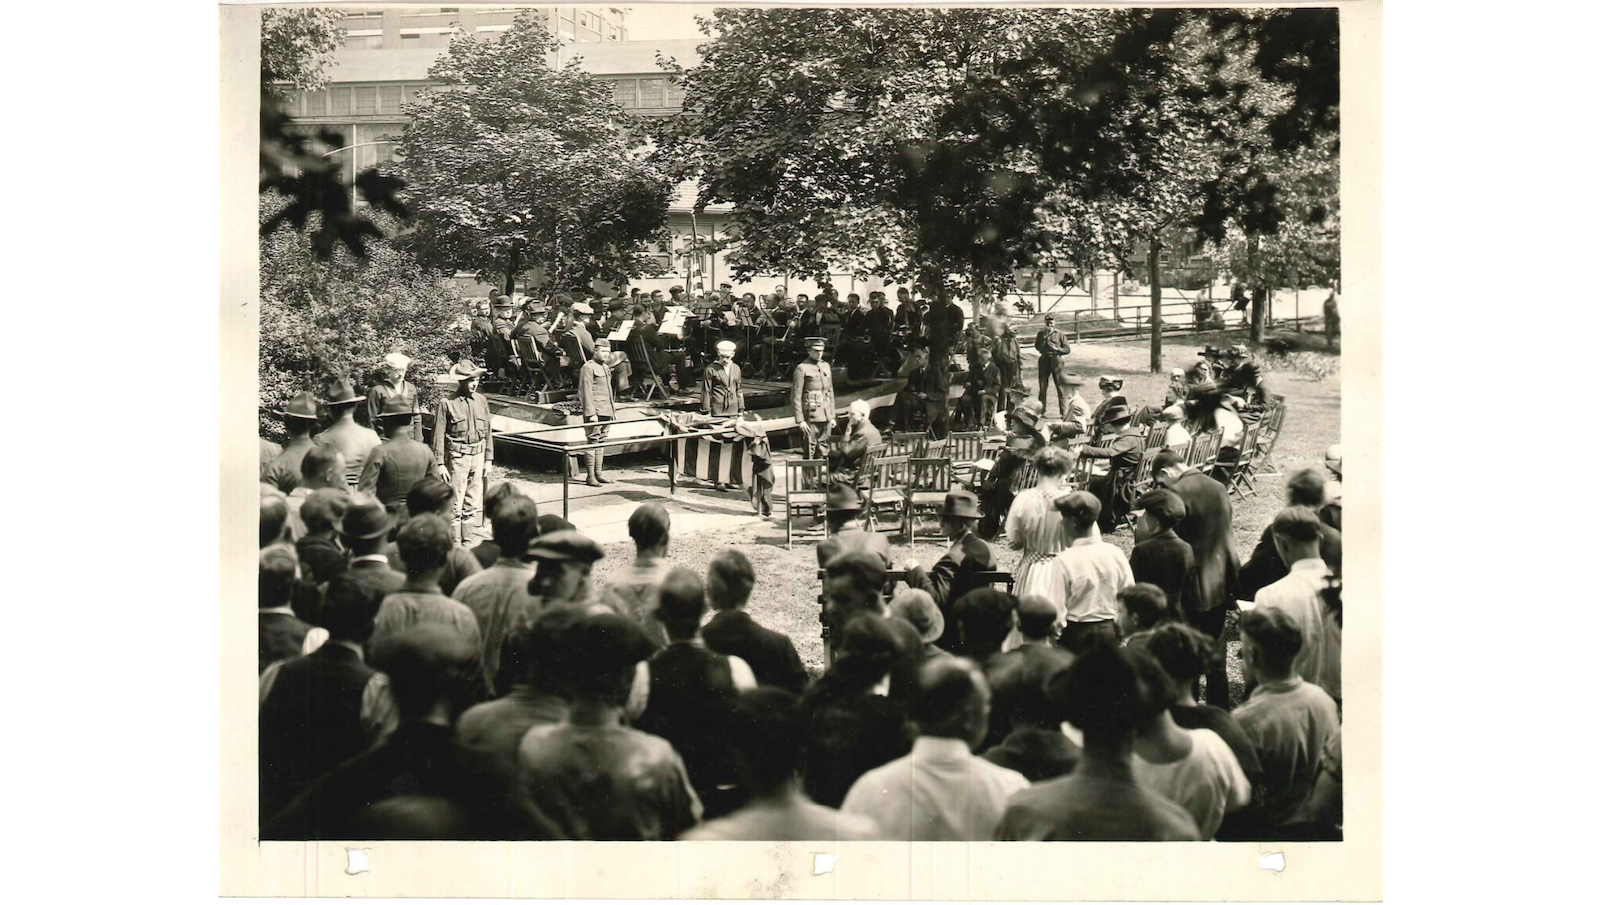 A rededication of Gov. Bigger’s grave occurred in 1924 with much fanfare. Credit: B. J. Griswold via the ACPL Collection